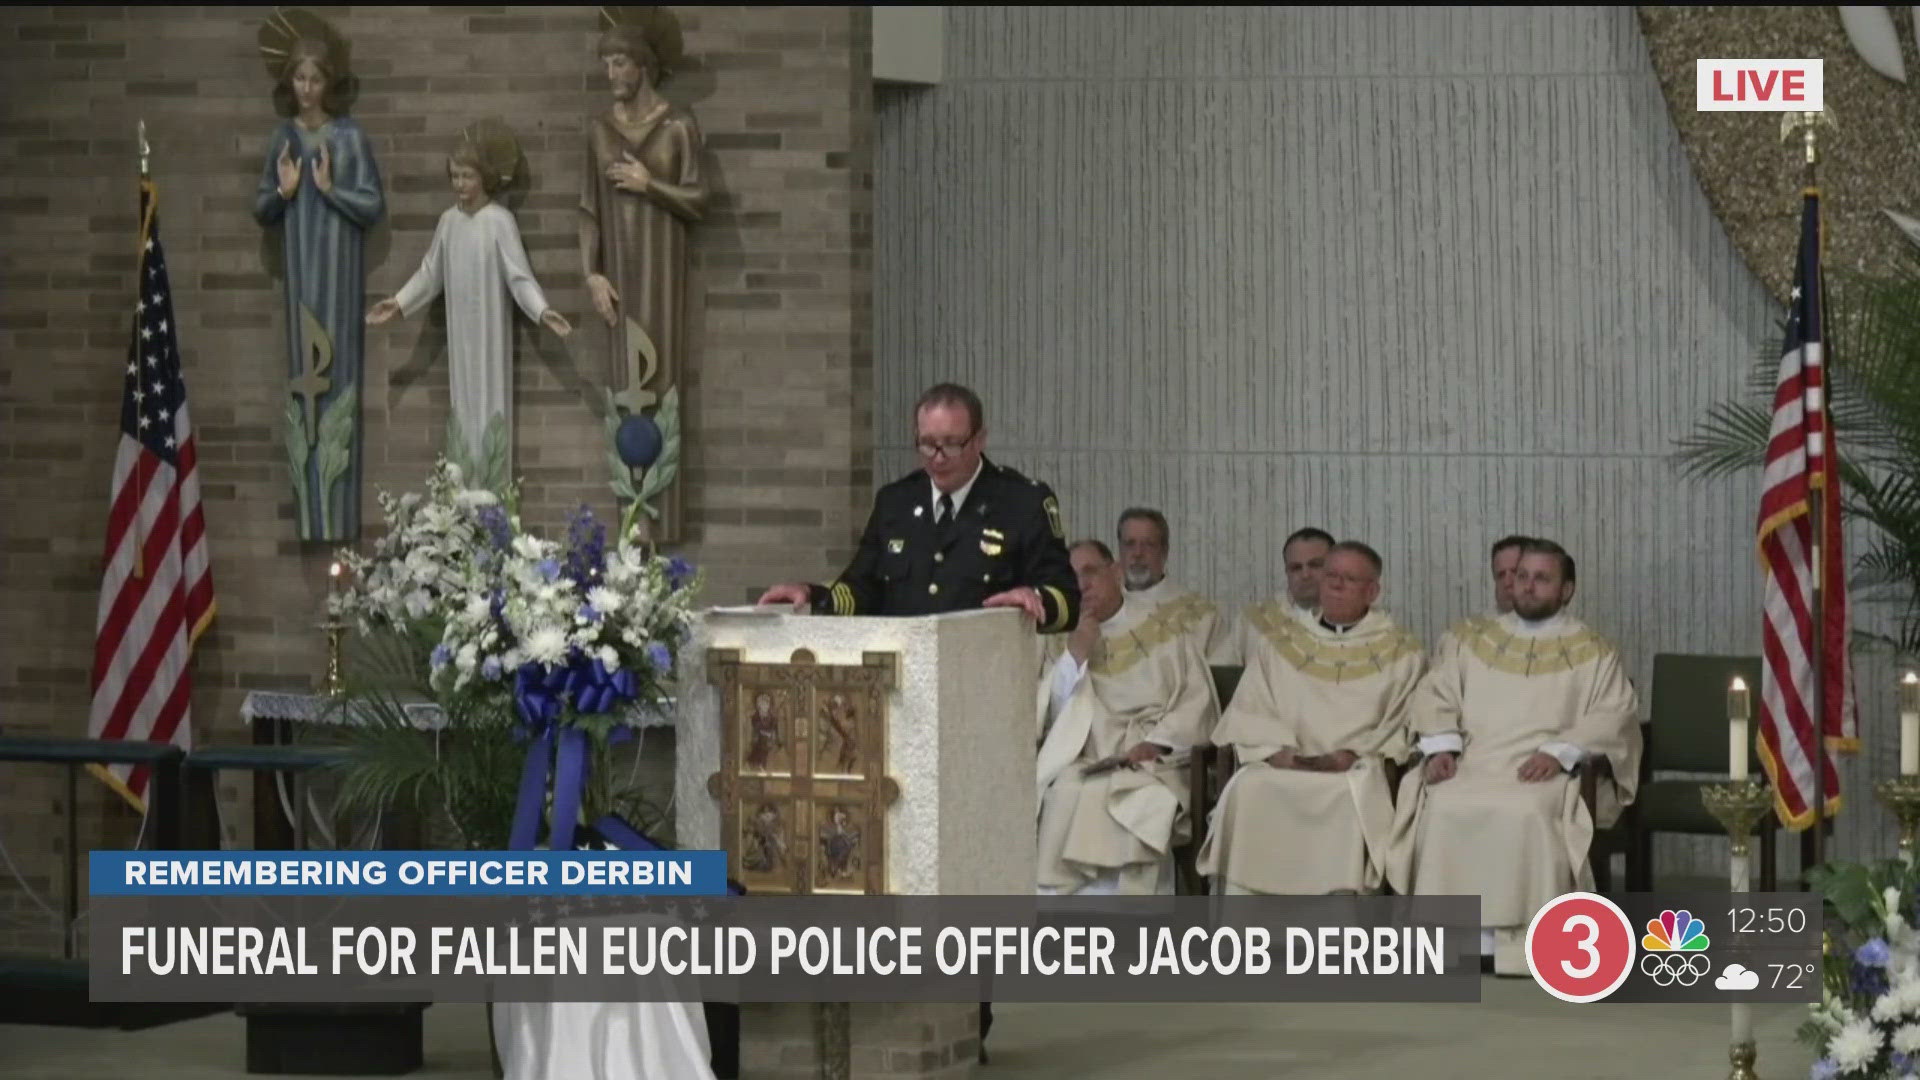 Funeral services are underway as the community gathers to pay their respects for Euclid police officer Jacob Derbin one week after he was shot and killed.